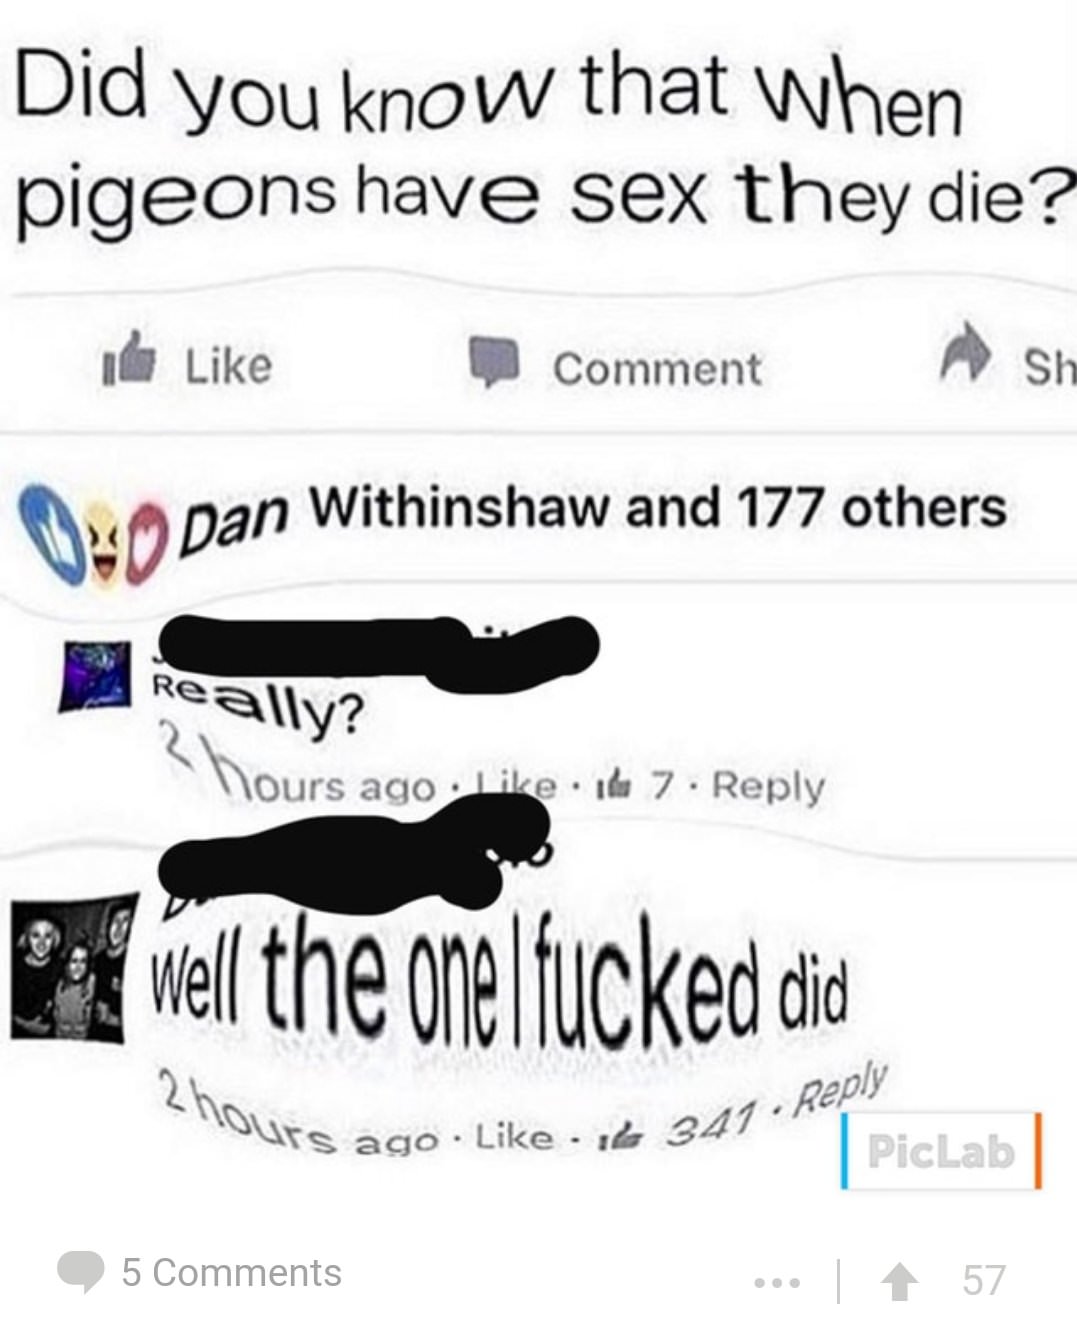 cringe design - Did you know that when pigeons have sex they die? Comment sh Dan Withinshaw and 177 others Really? hours ago. Id 7. fel the opel fucked did ours ago l 341 341 PicLab | 5 Cool 57